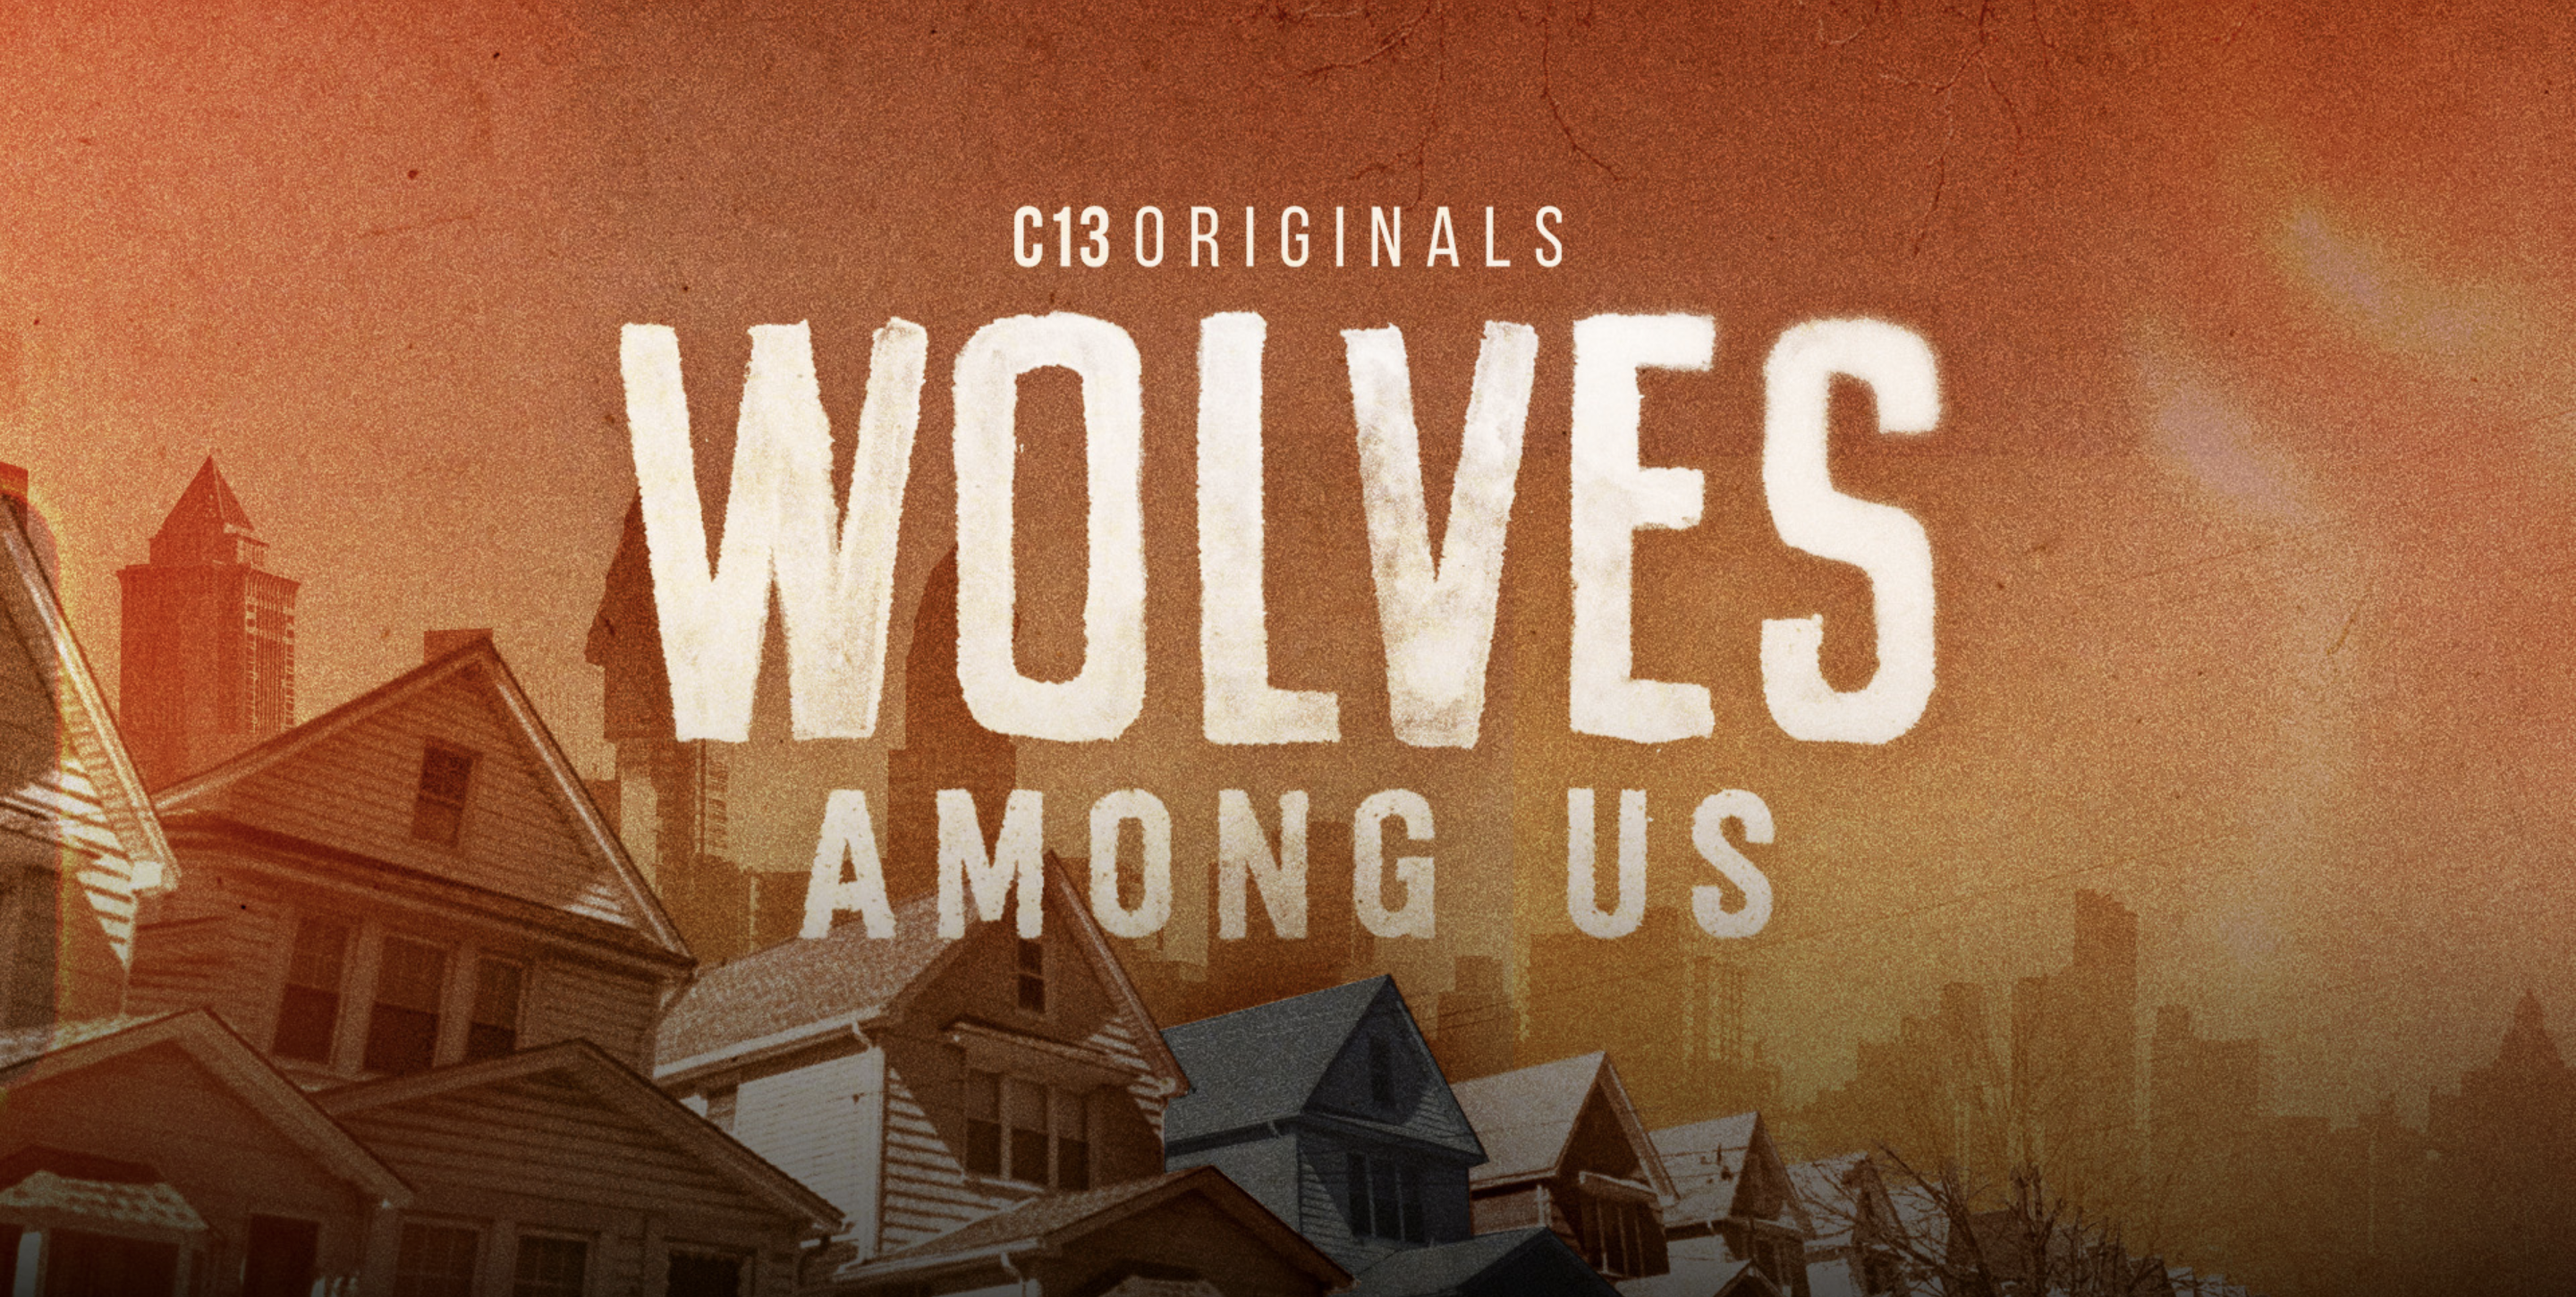 Wolves Among Us splash logo. Text reads 'C13Originals Wolves Among Us' over a background of a row of houses, one is discolored.